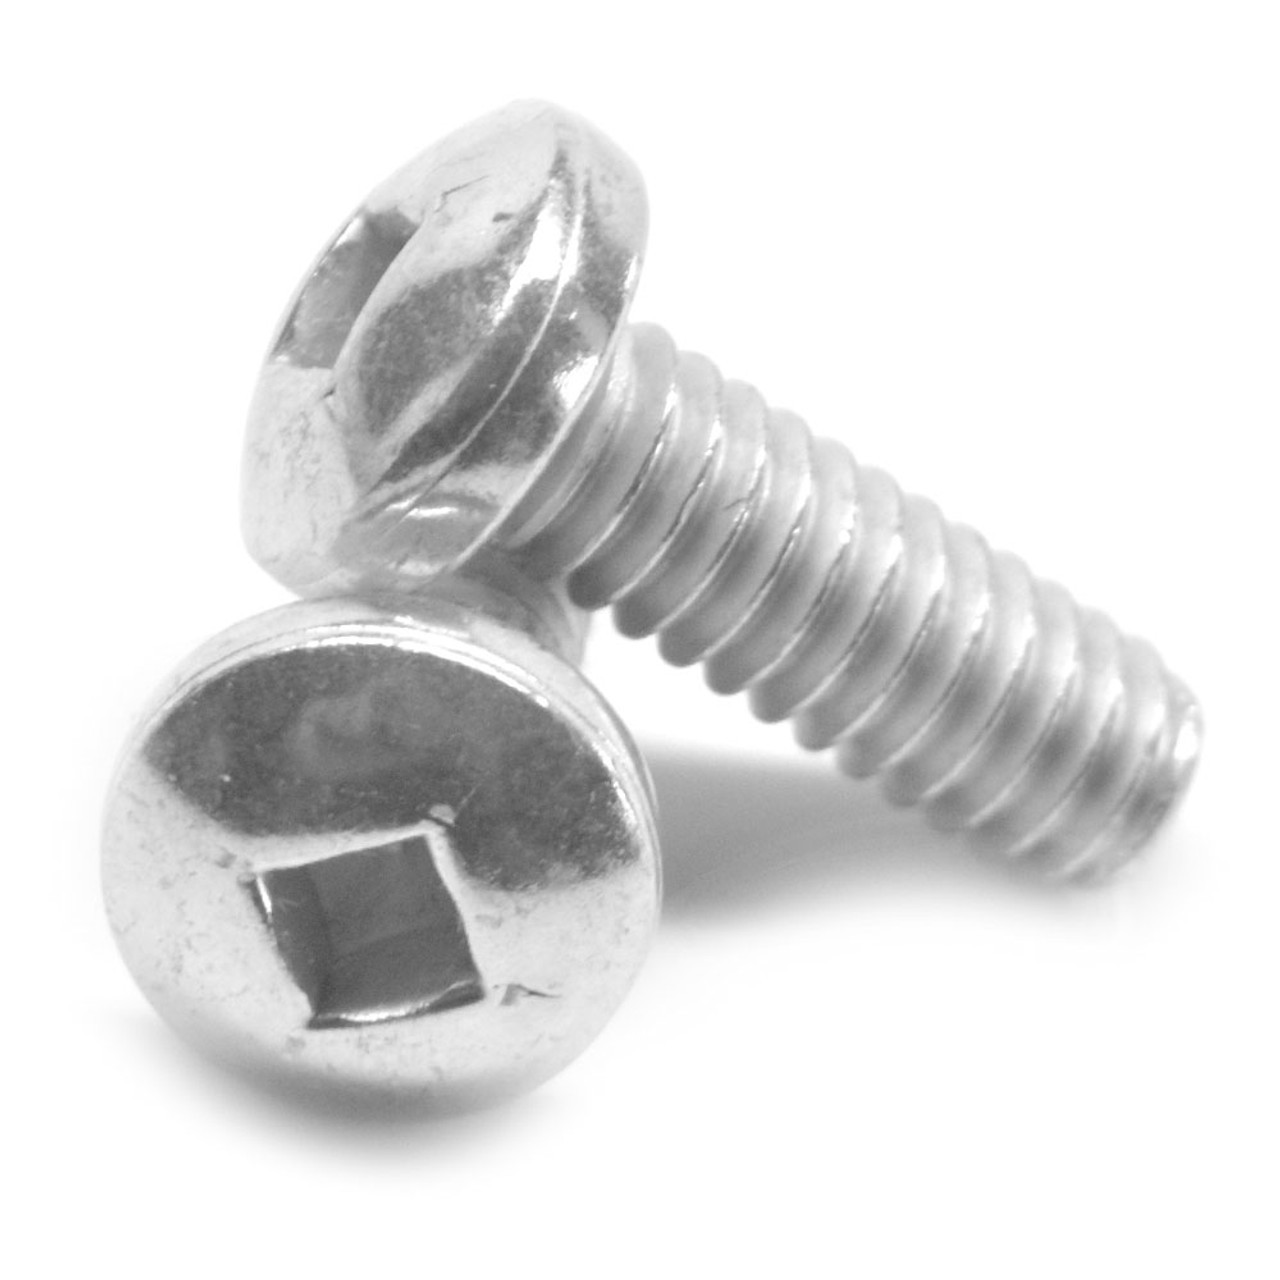 1/4"-20 x 4" (FT) Coarse Thread Machine Screw Square Drive Pan Head Stainless Steel 18-8